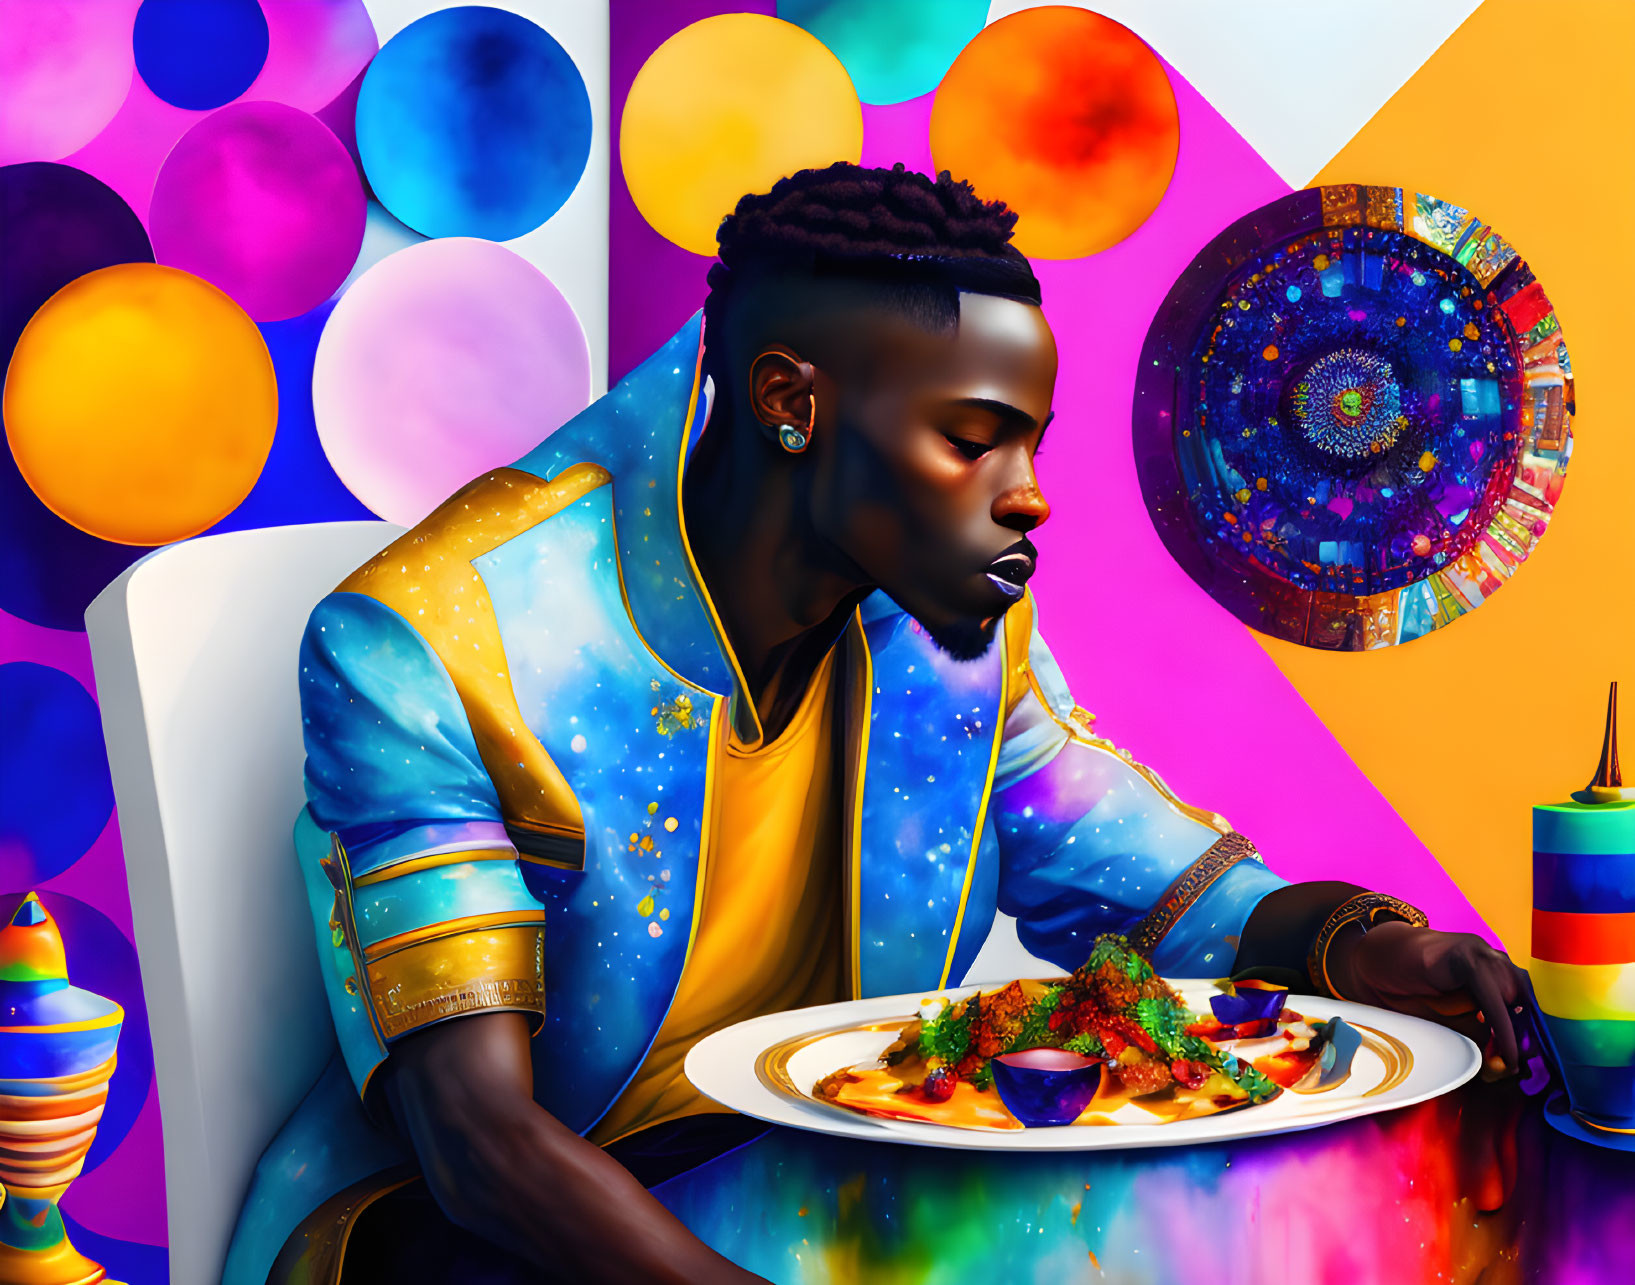 Man with Stylish Haircut Seated Before Vibrant Dish in Abstract Setting